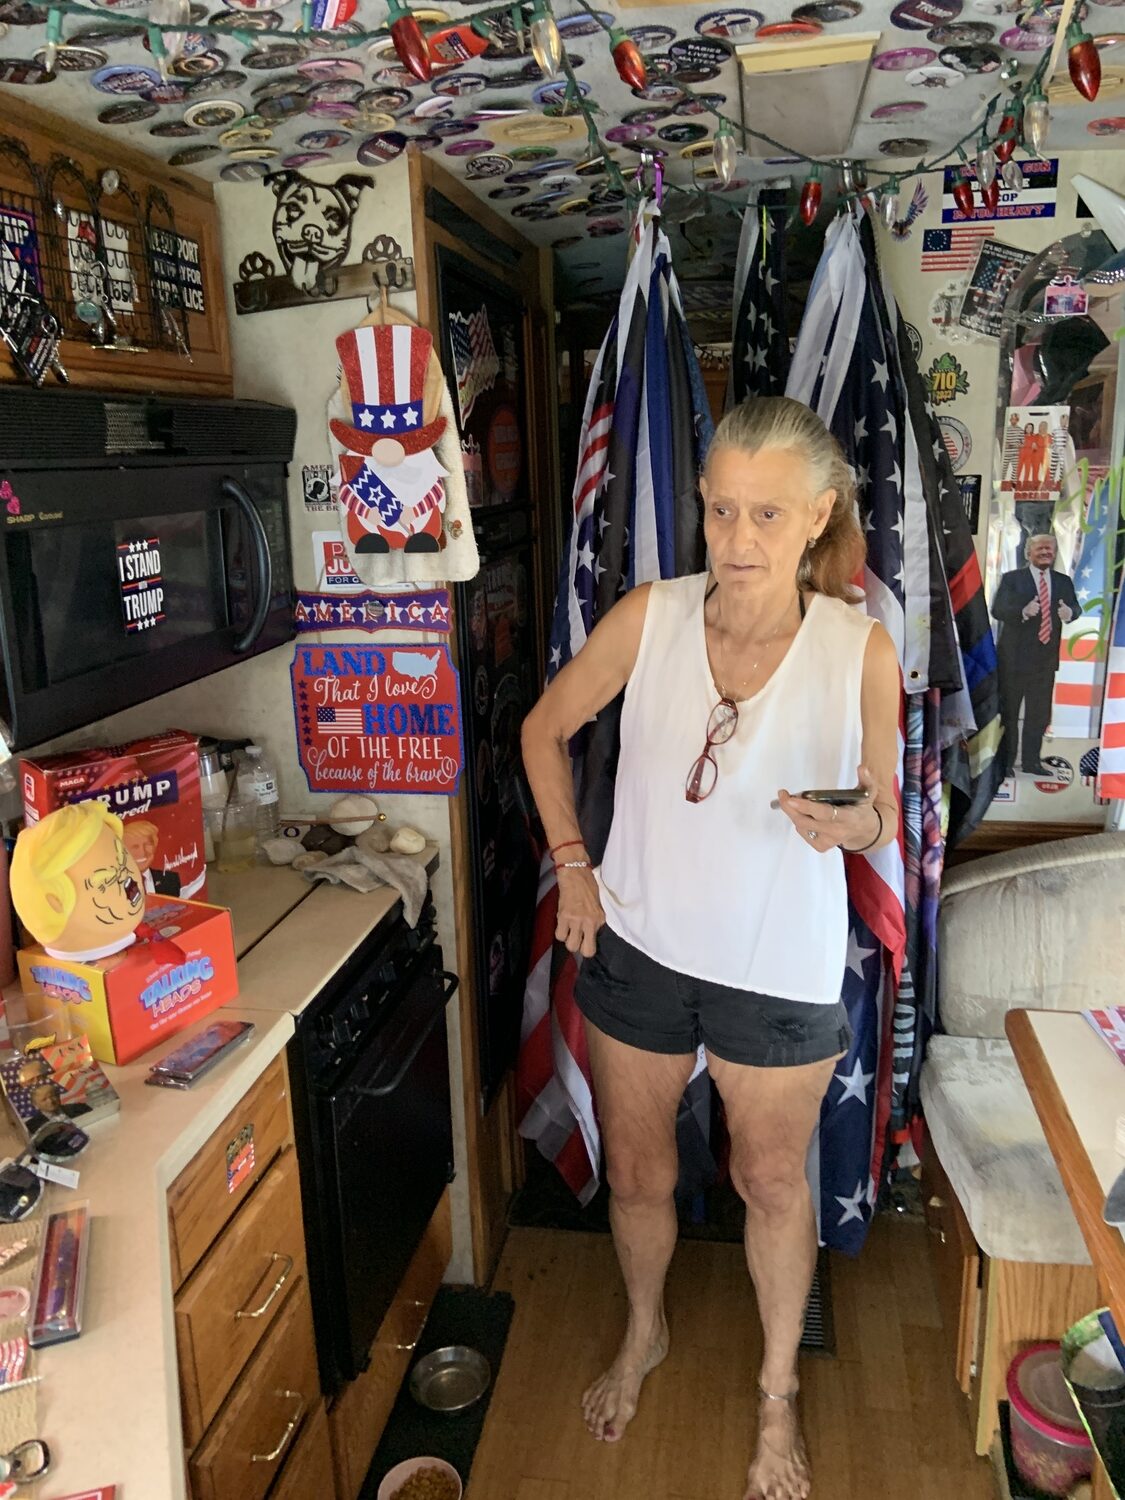 Donna Edin said Southampton Town Police told her she was not allowed to sell pro-Donald Trump merchandise without a peddler's permit, but she said a number customers made donations in exchange for items. STEPHEN J. KOTZ